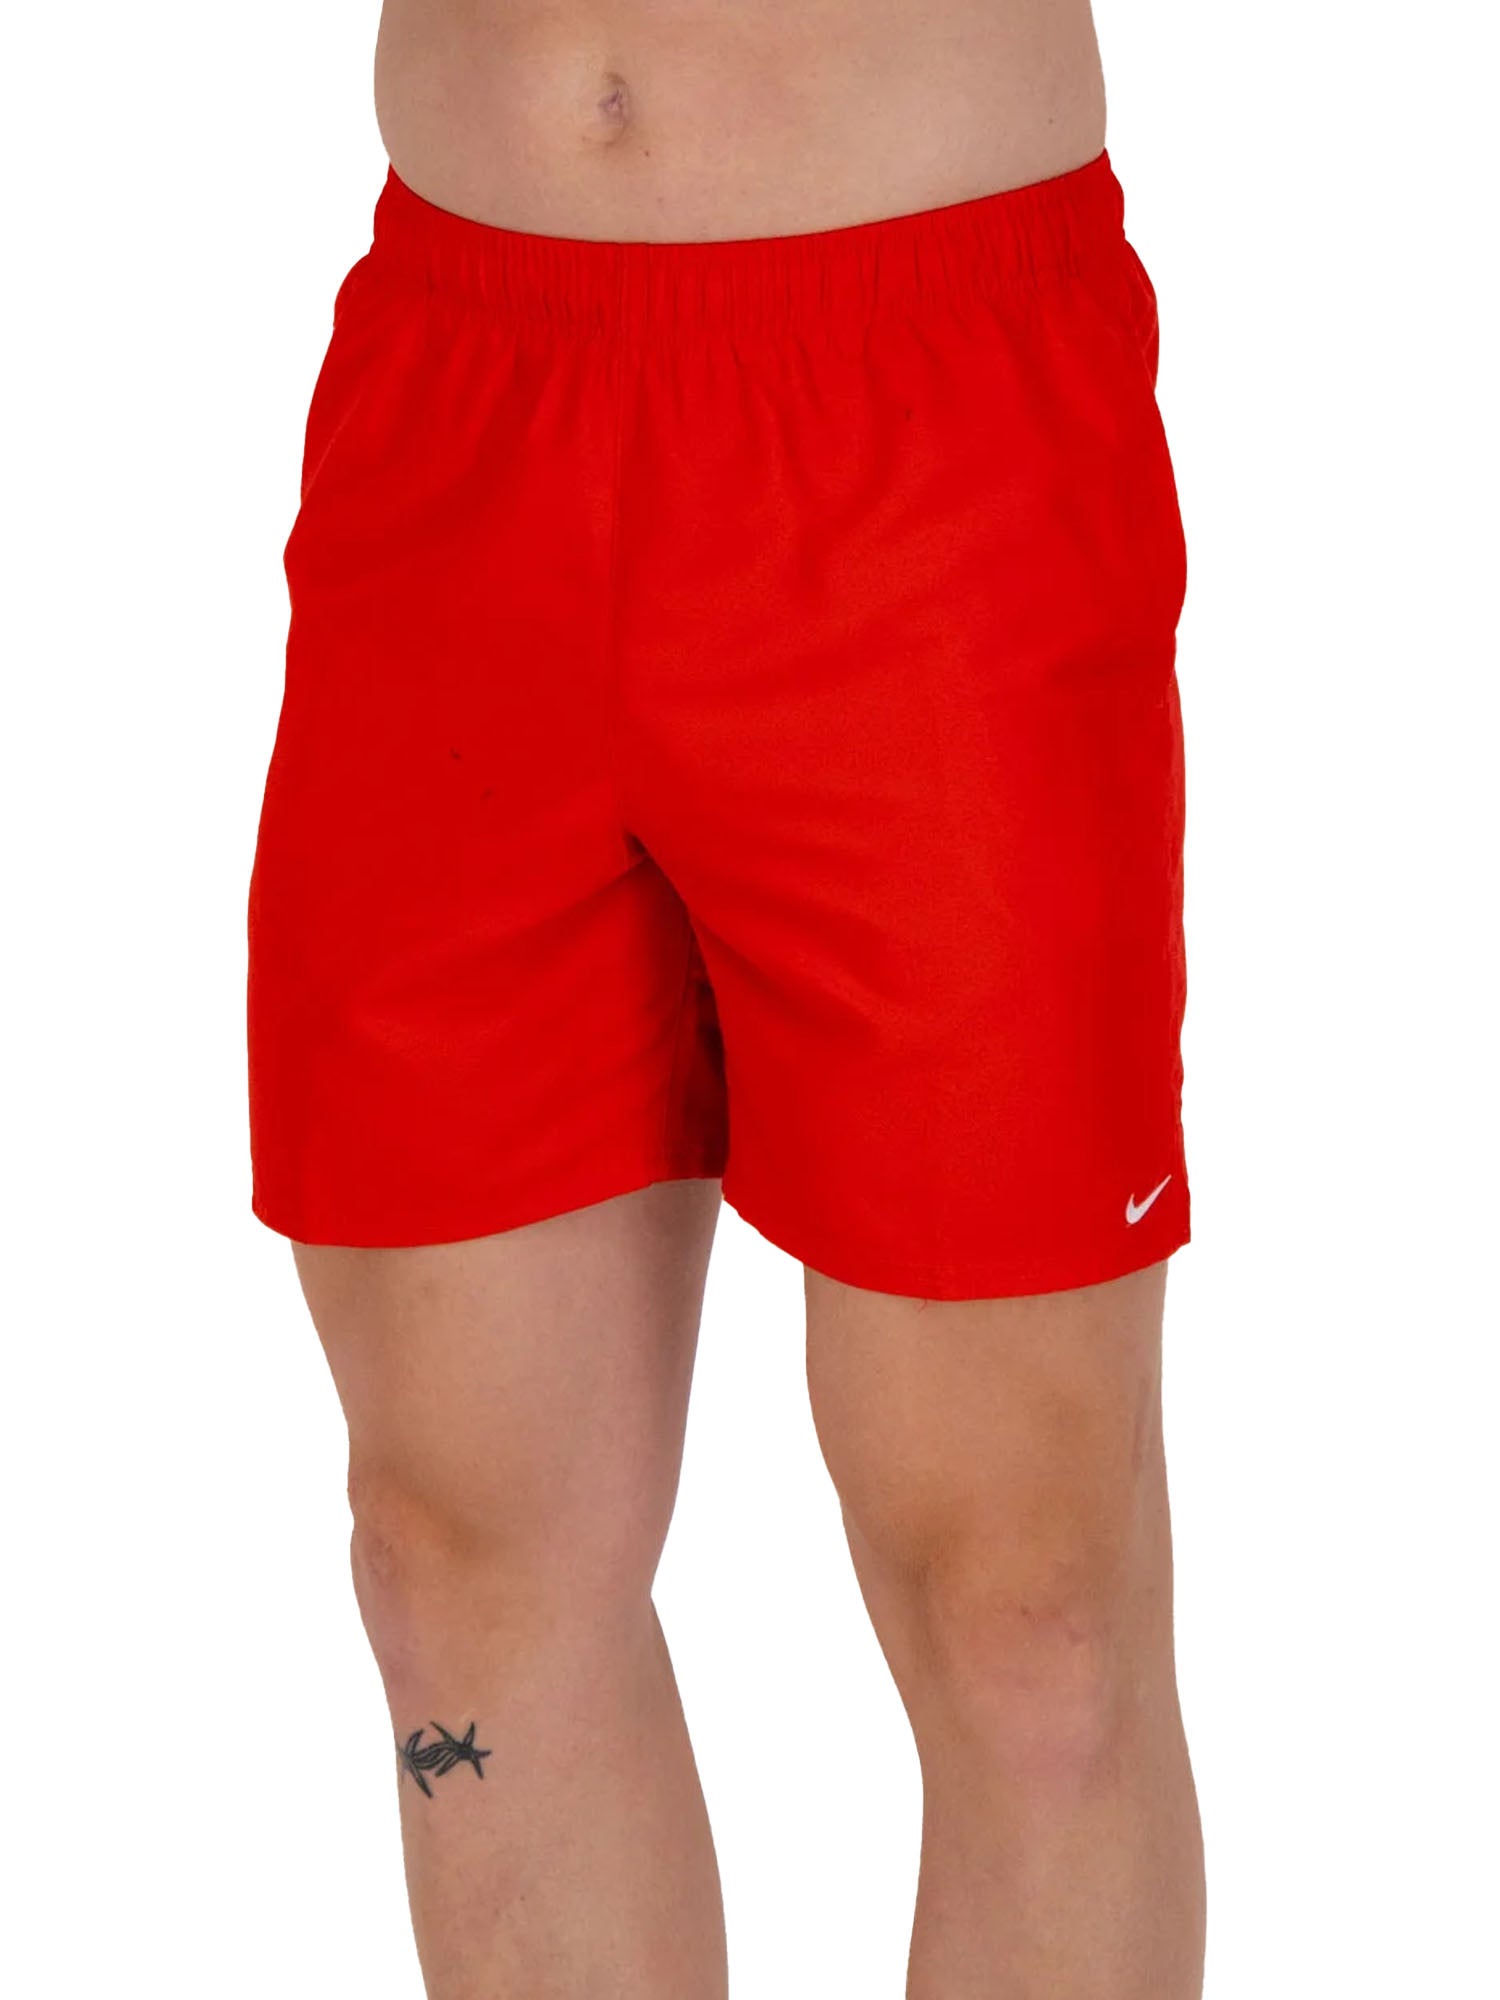 SHORTS Rosso Nike